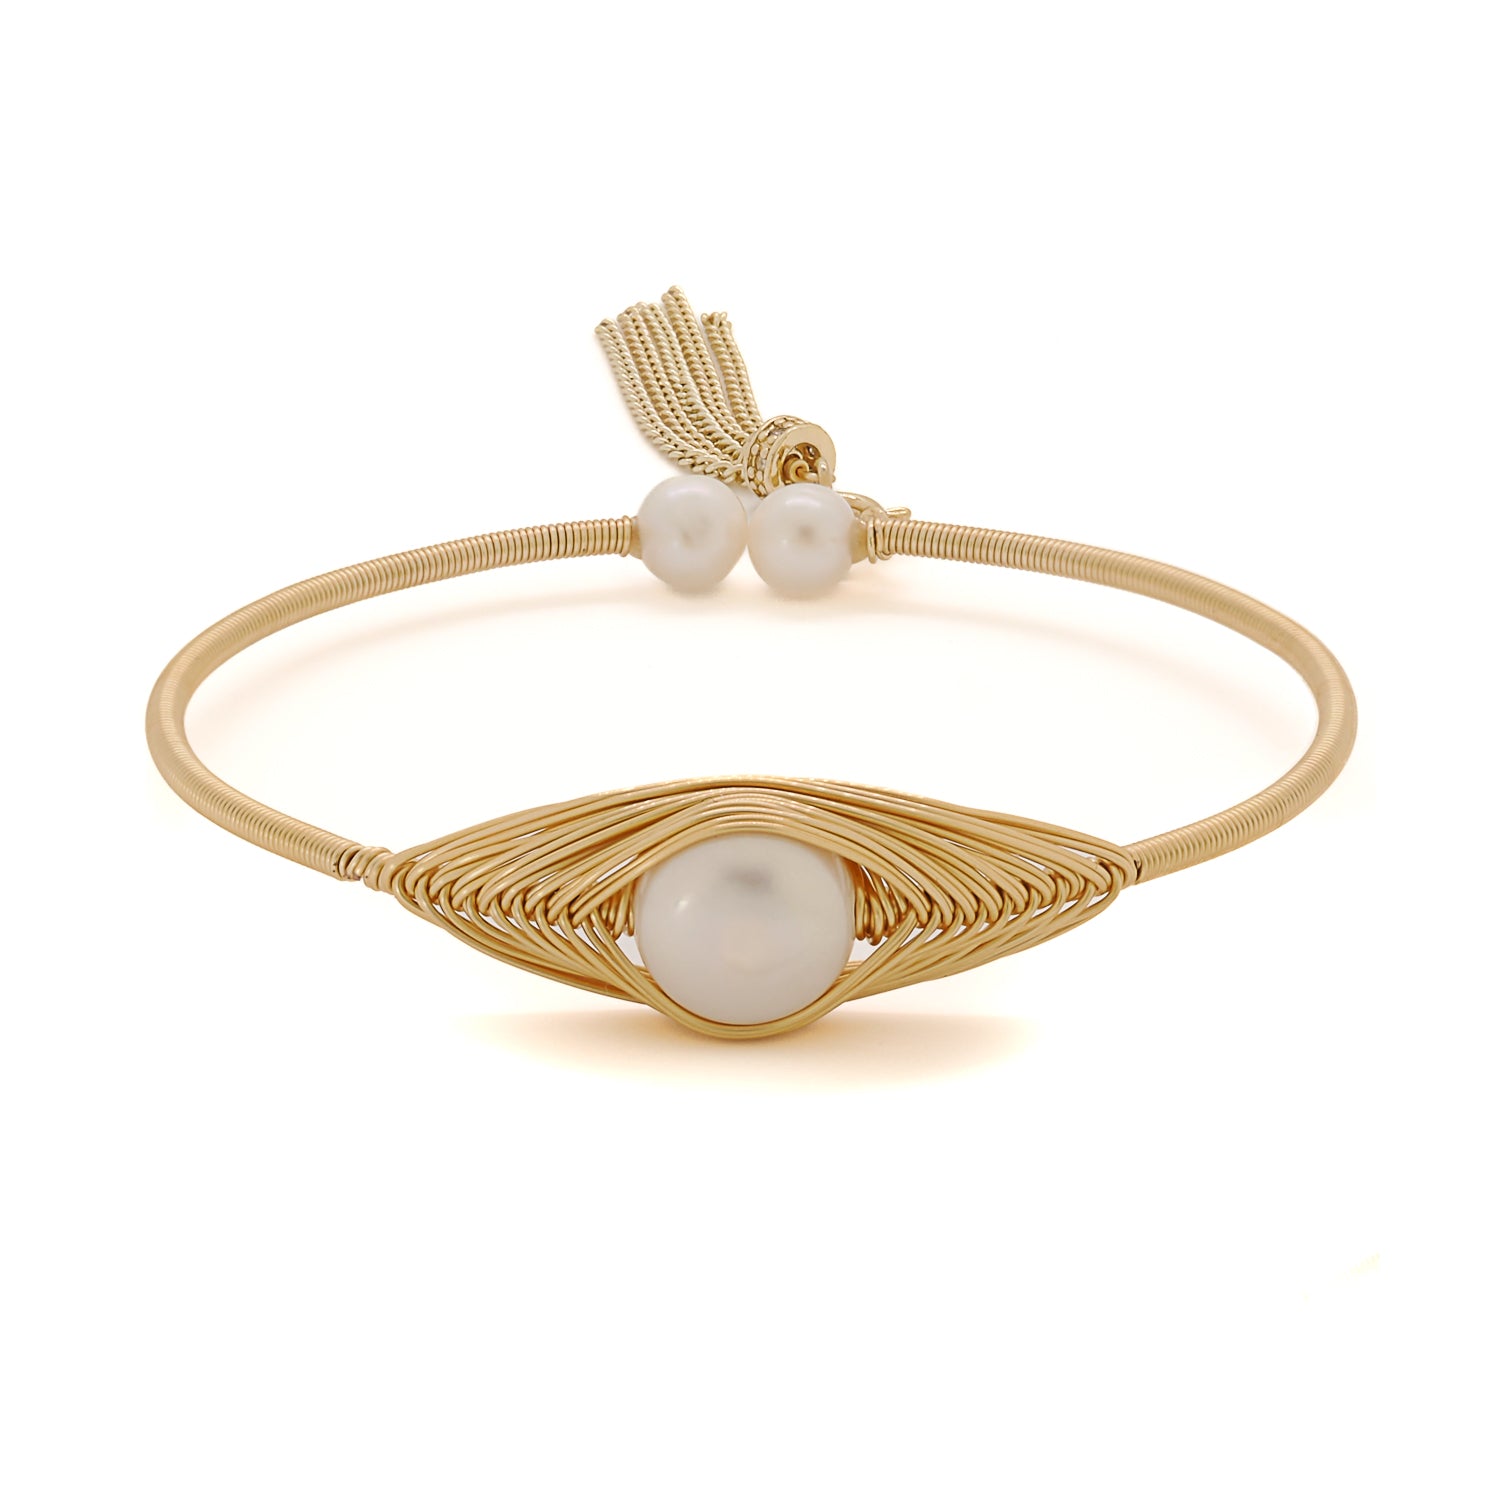 Luxurious Cleopatra Gold and Pearl Bangle Bracelet with exquisite pearls.